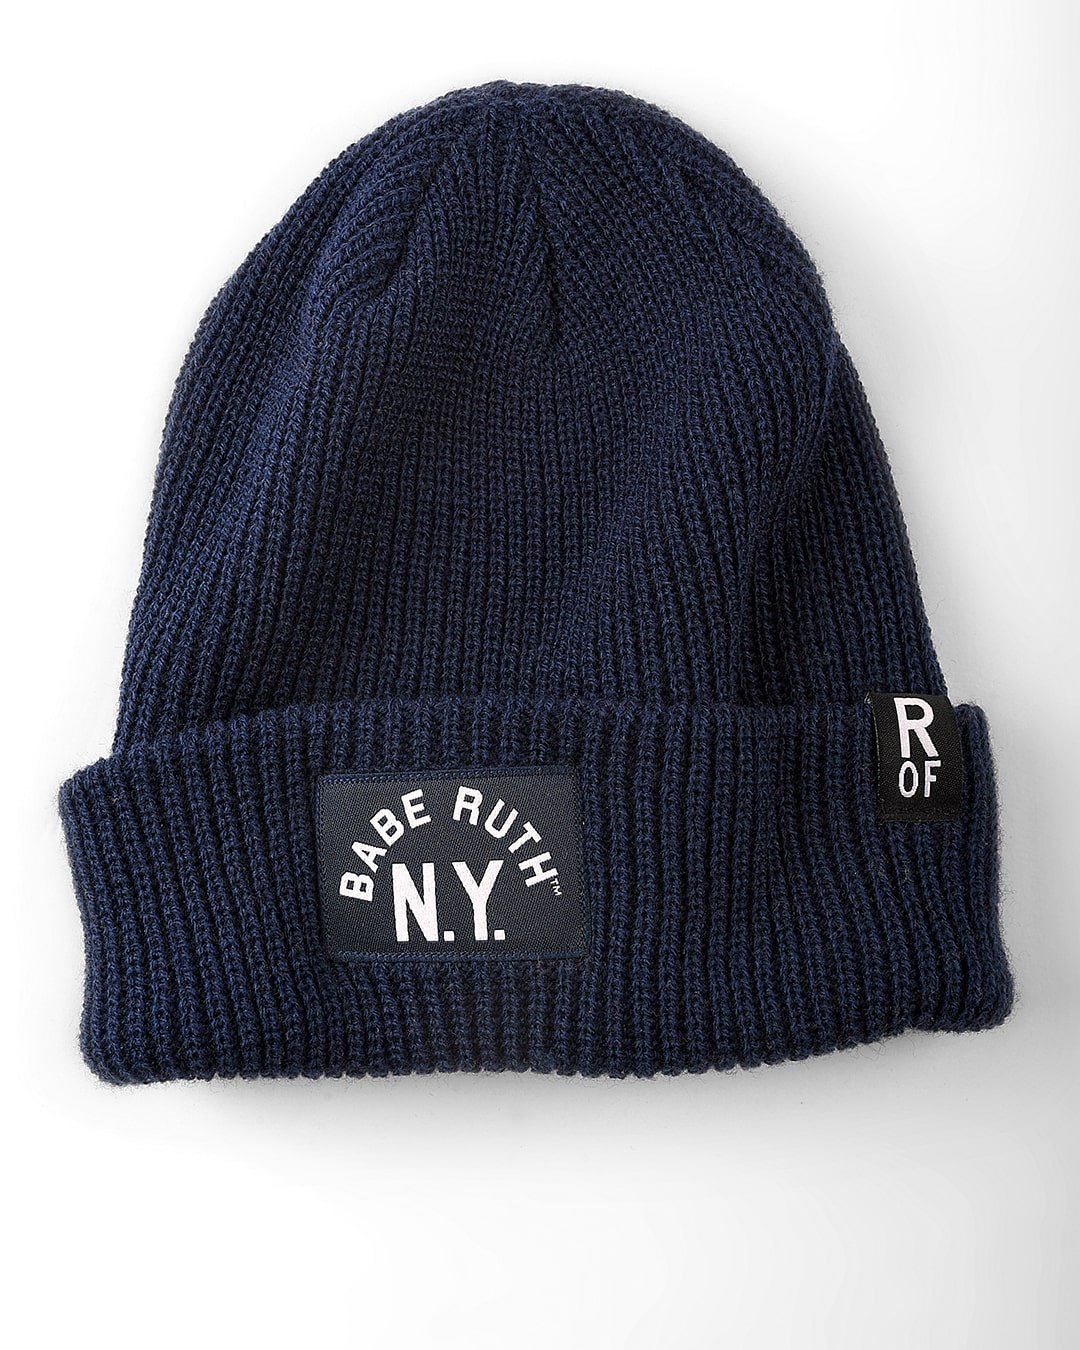 Babe Ruth N.Y. Navy Beanie - Roots of Fight International